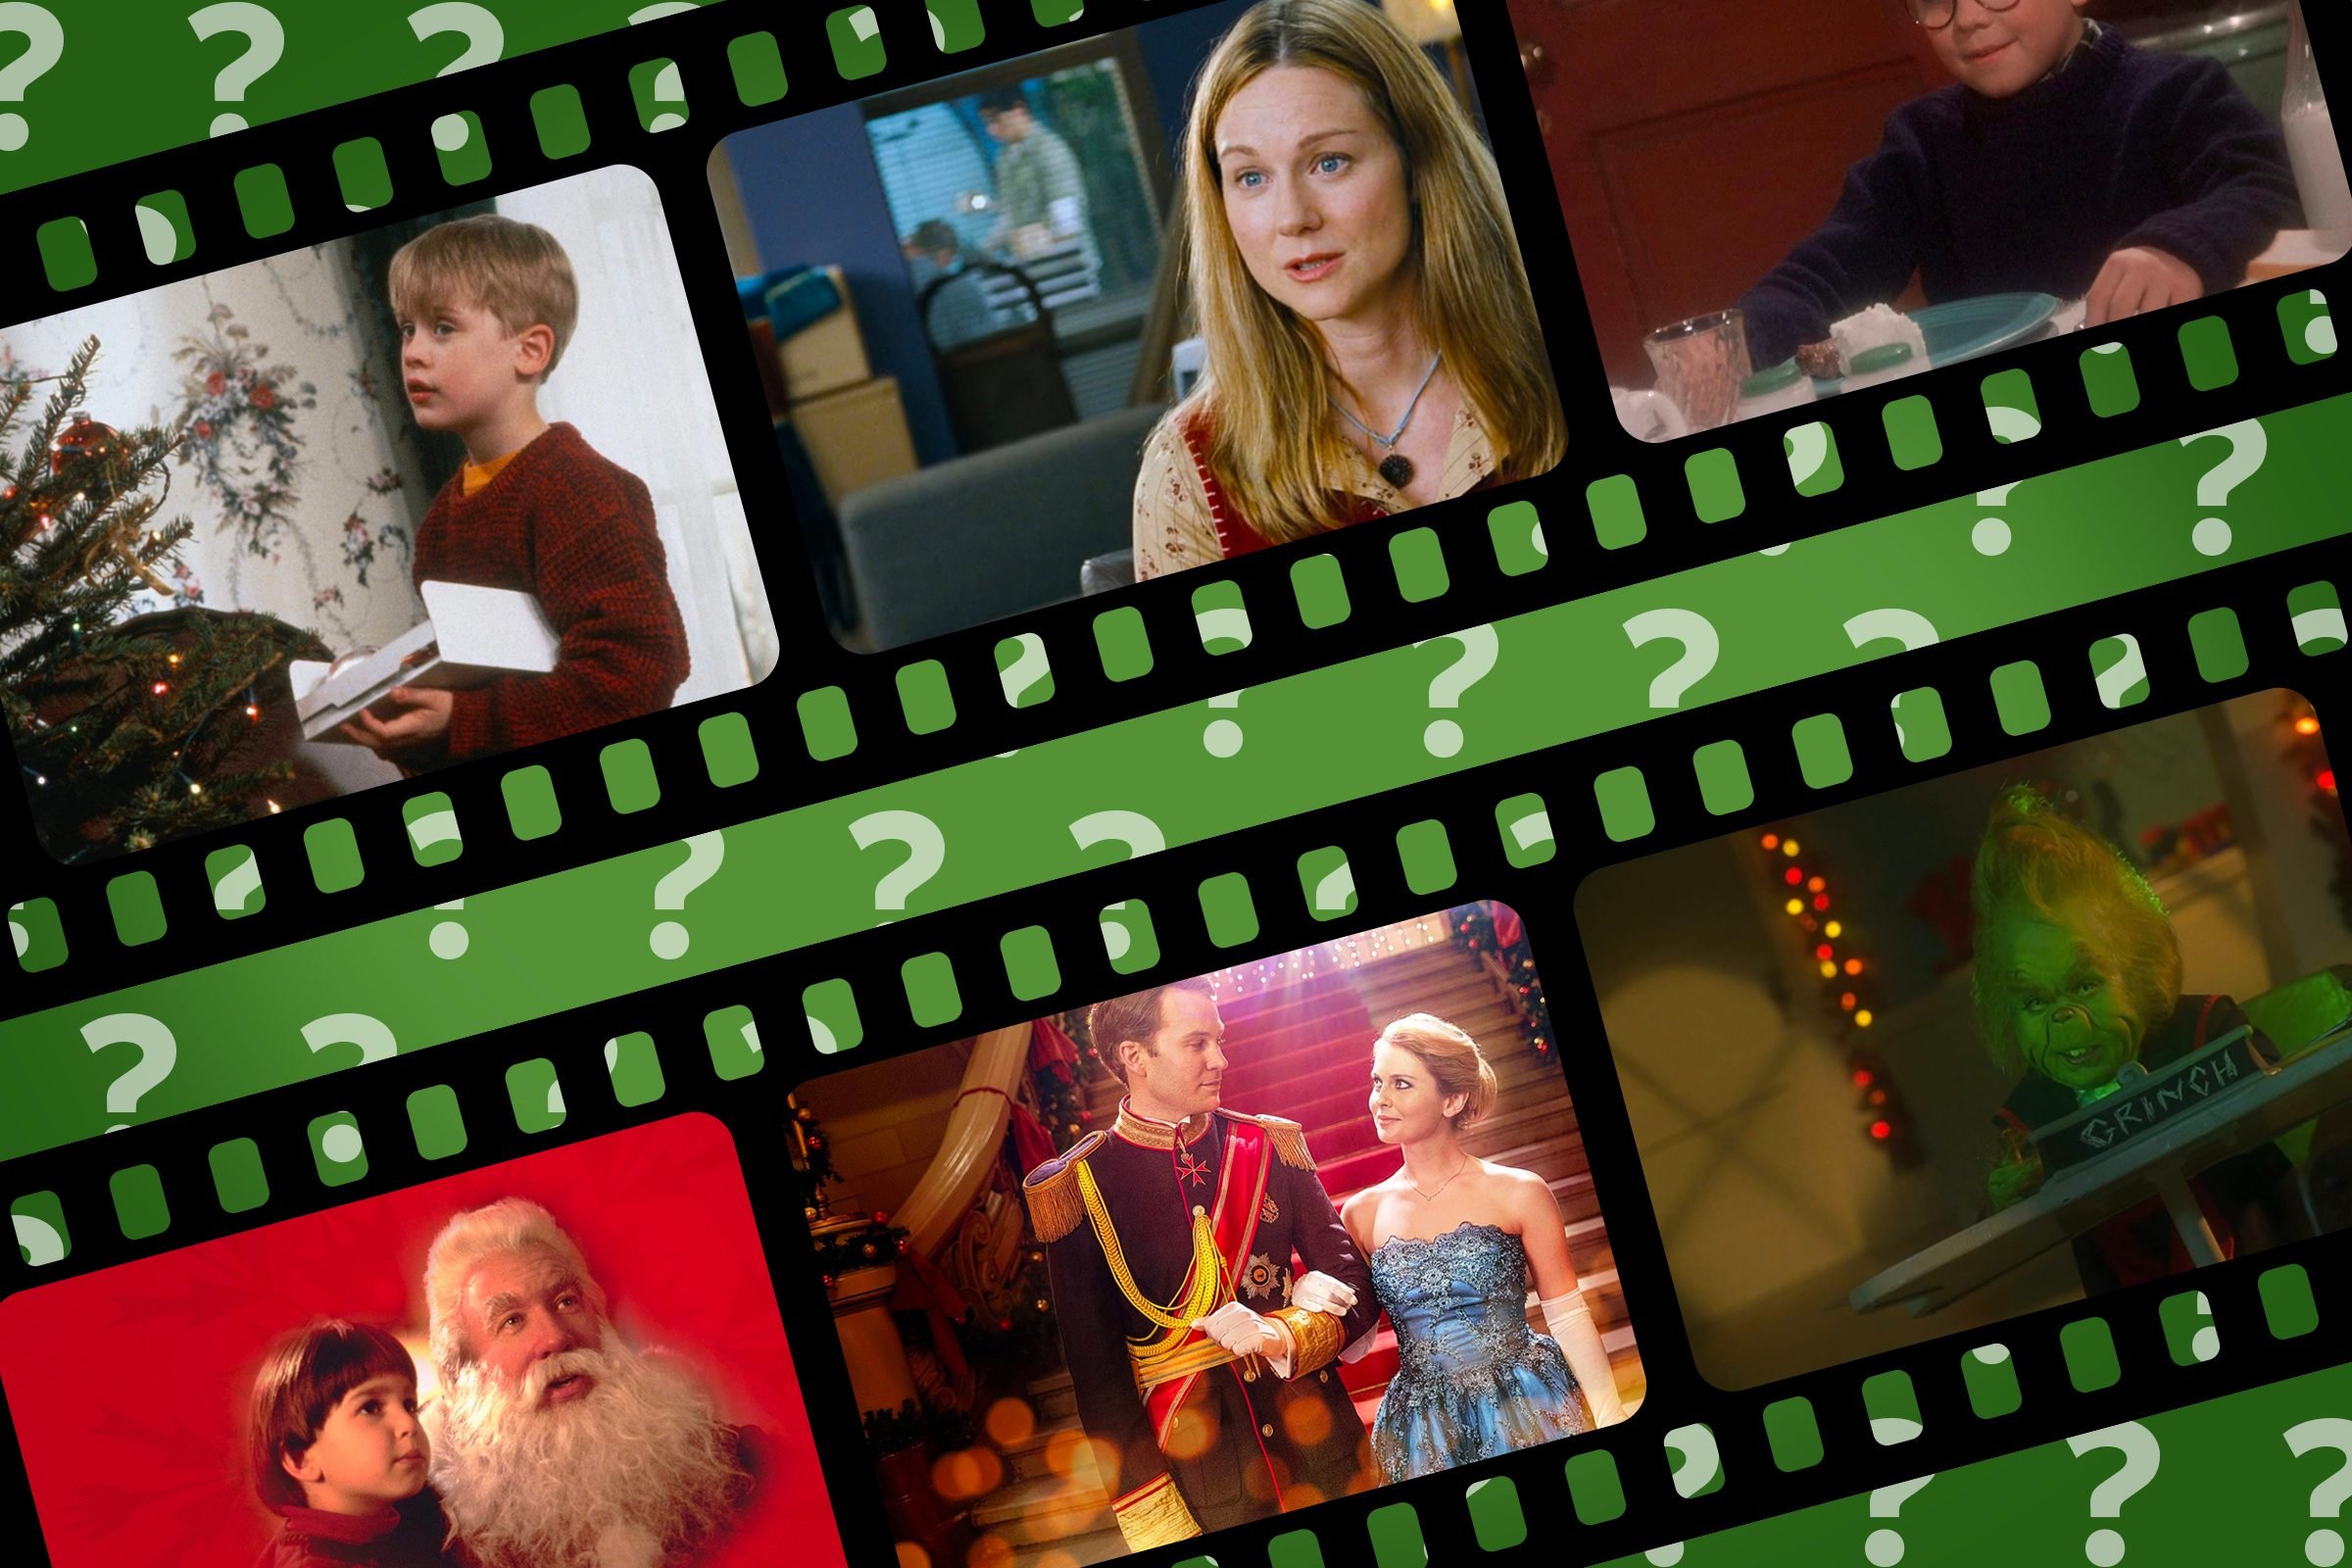 140 Christmas Movie Trivia Questions (with Answers) to Test Your Film IQ